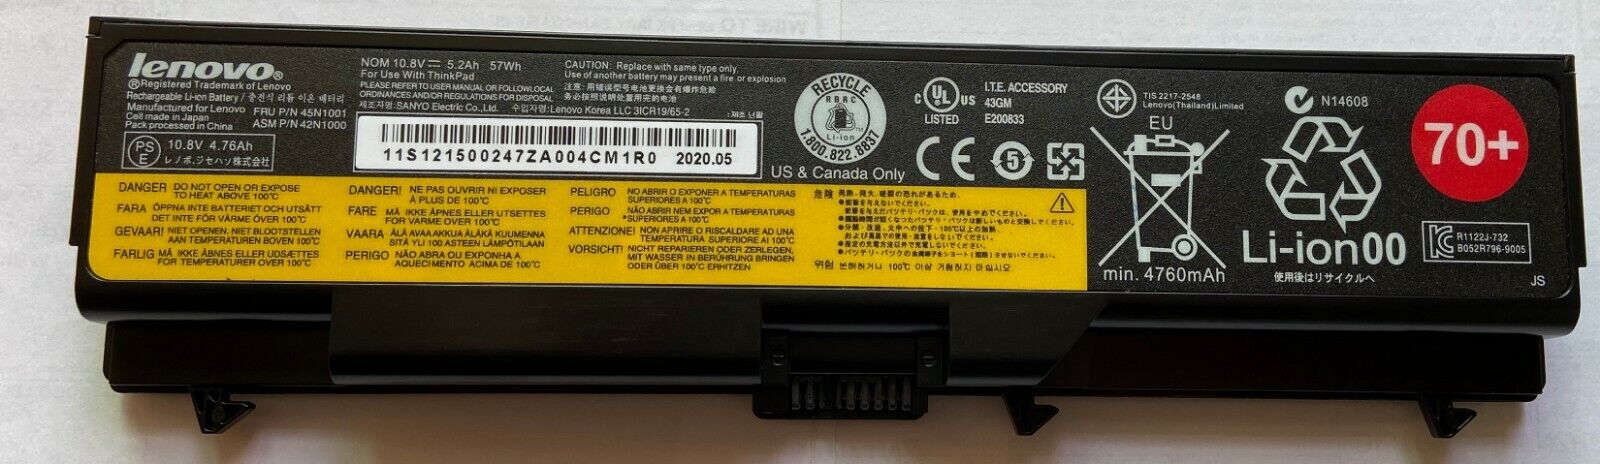 Genuine 0A36302 0A36303 45N1001 Battery For Len ovo Thinkpad T410 T420 T430 70+